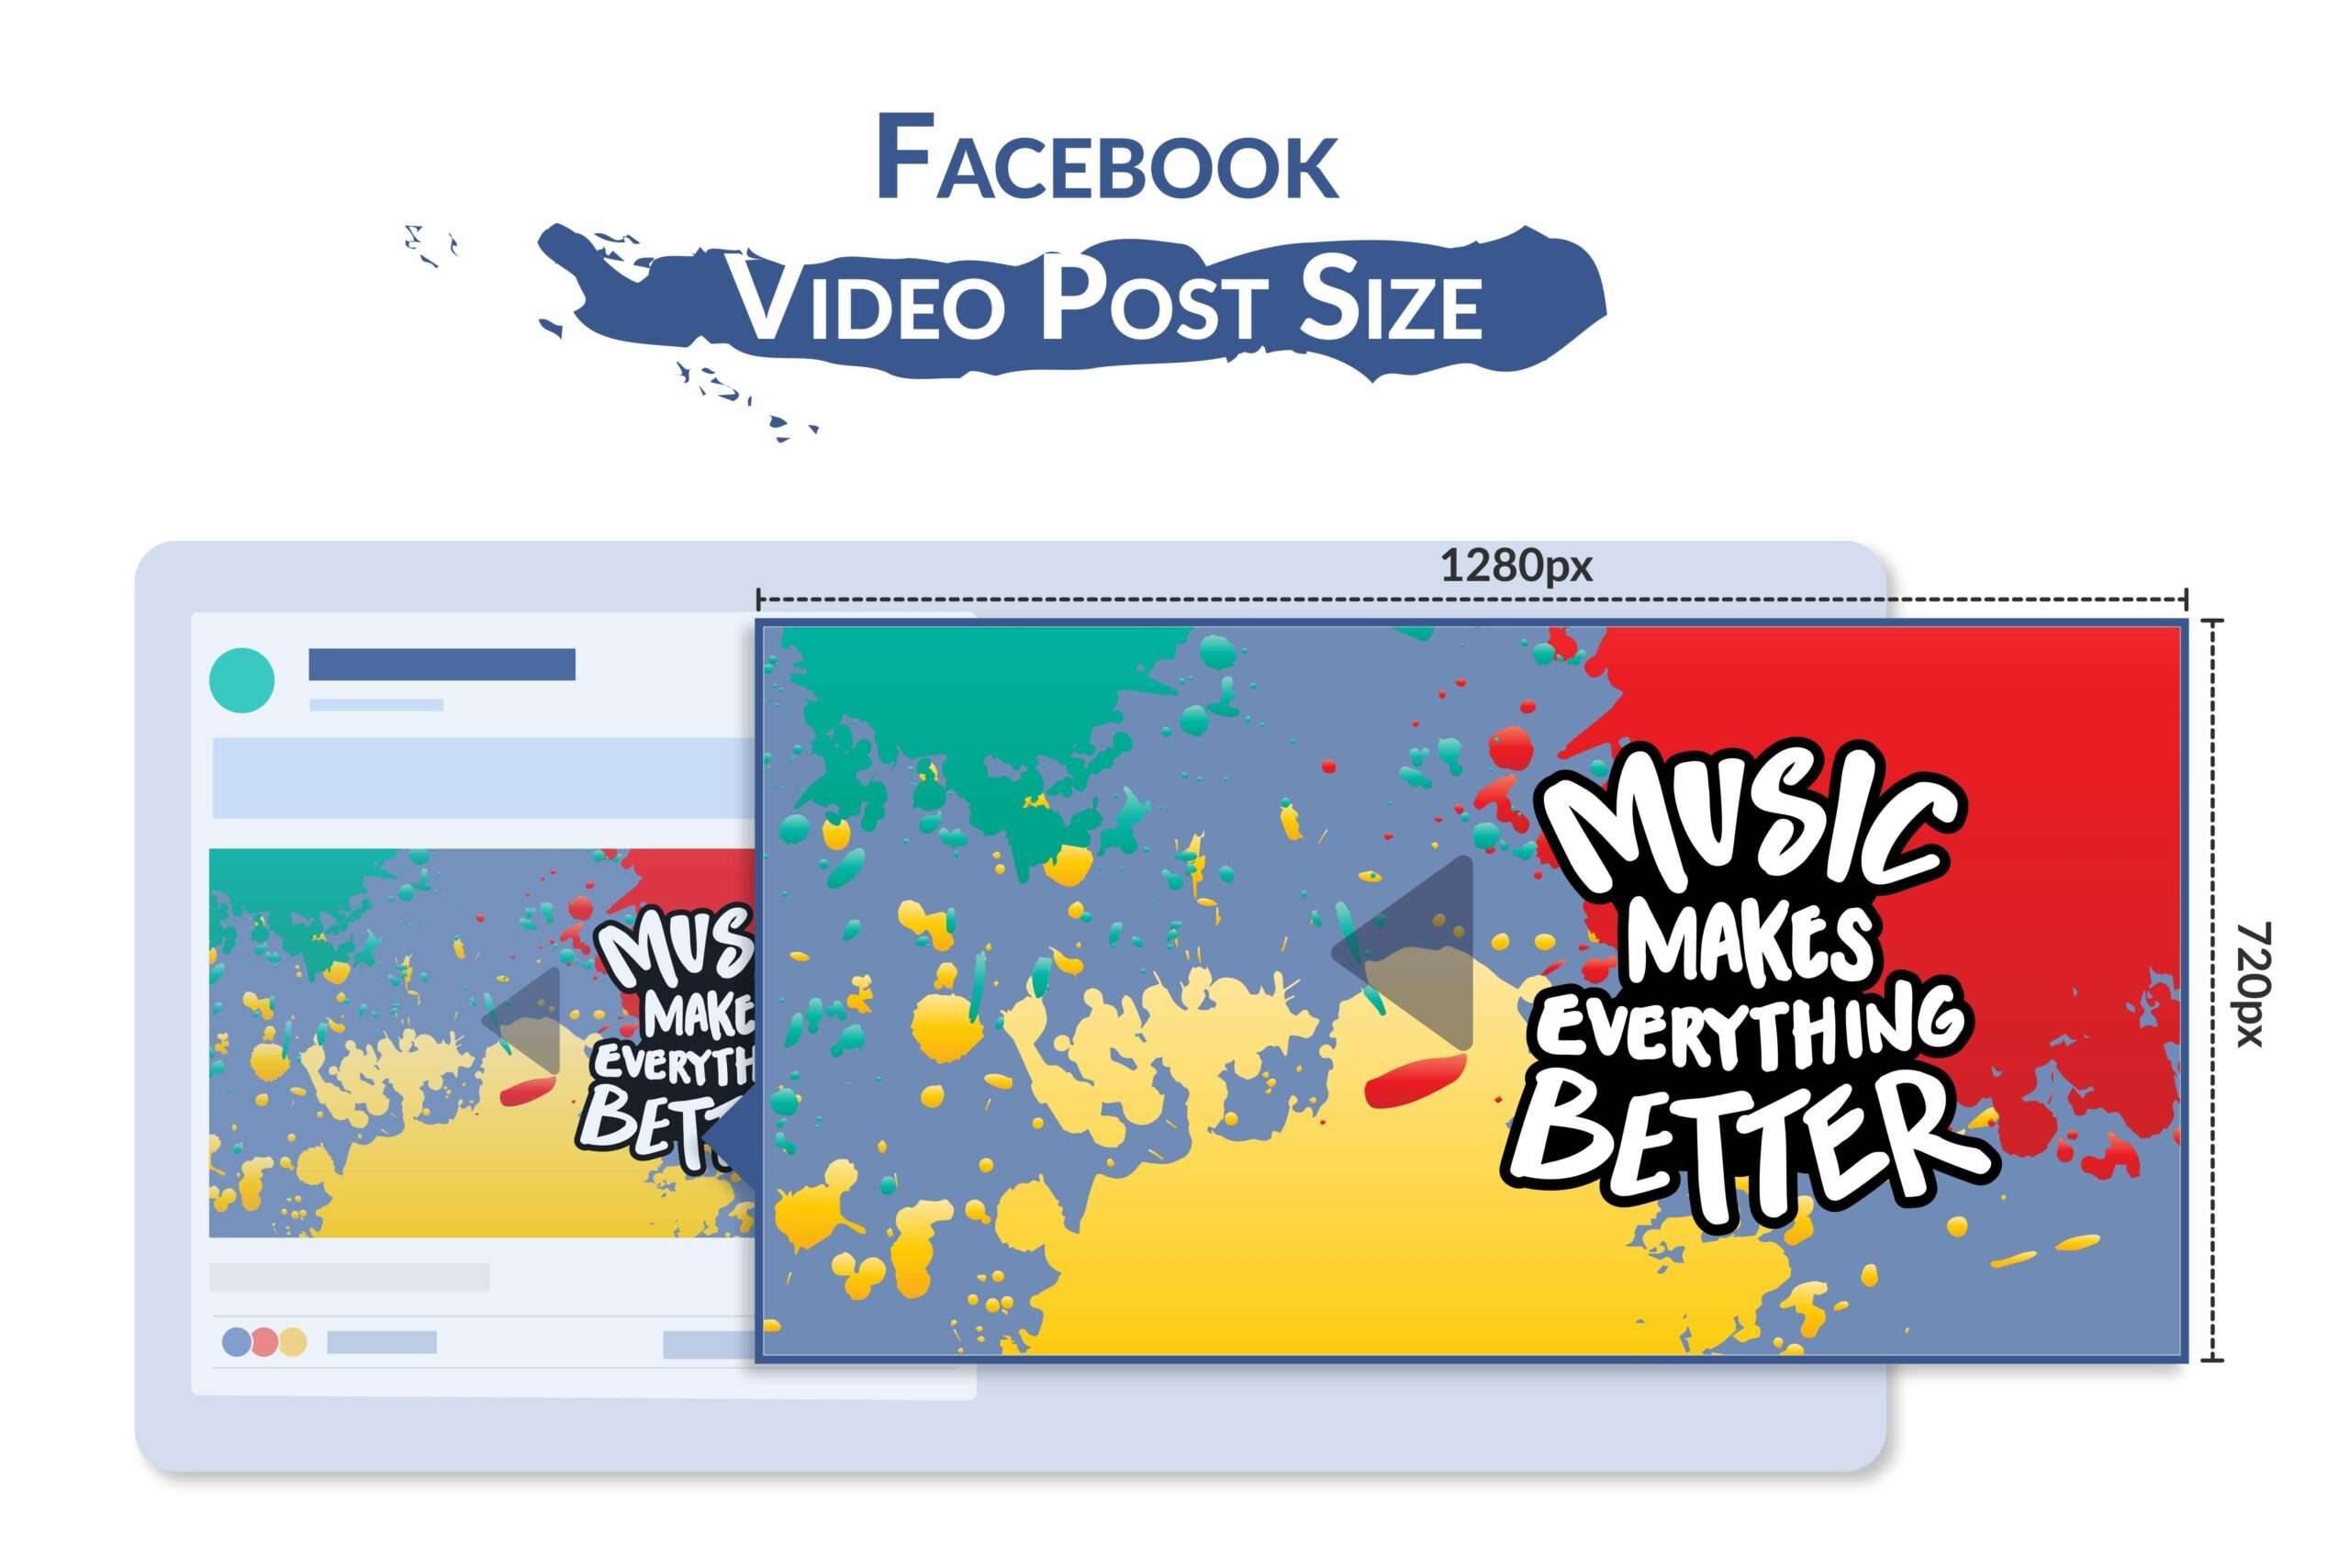 Facebook Video Post size